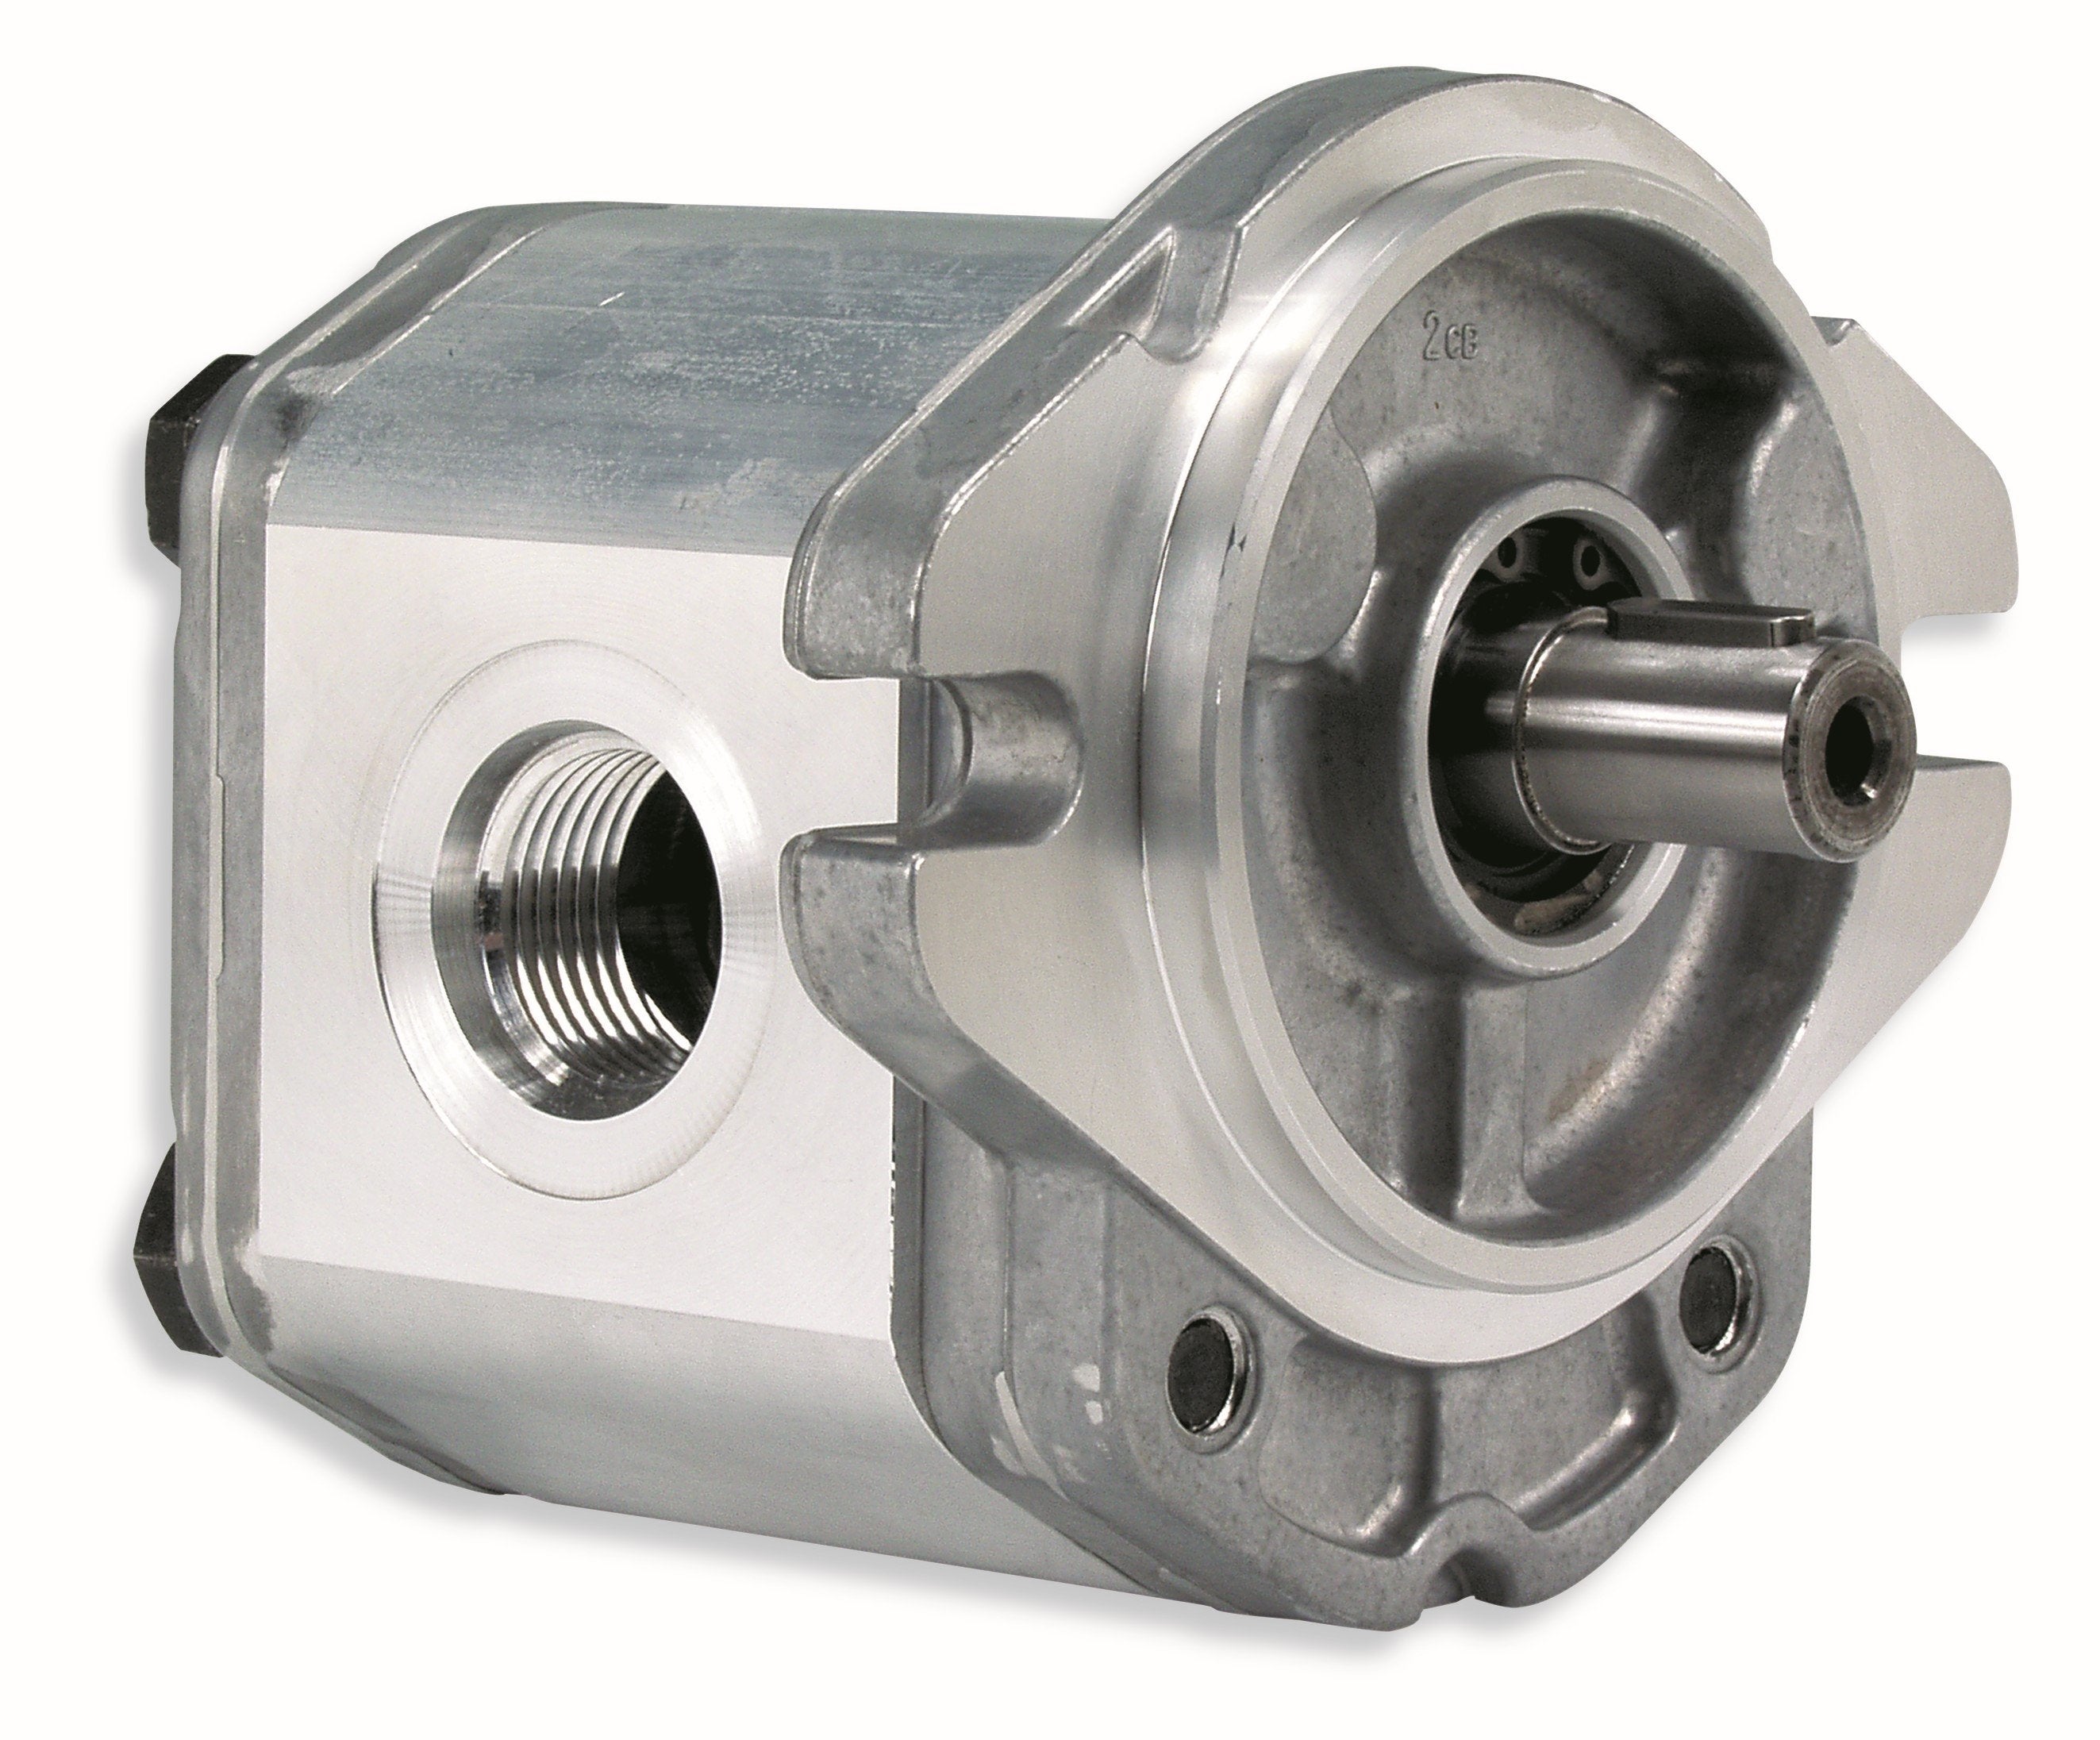 ALM2A-R-16-E2 : Marzocchi Gear Motor, Bidirectional, 11.5cc, 3335psi rated, 4000RPM, 0.75 (3/4") #12 SAE ports, 5/8" Bore x 5/32" Keyed Shaft